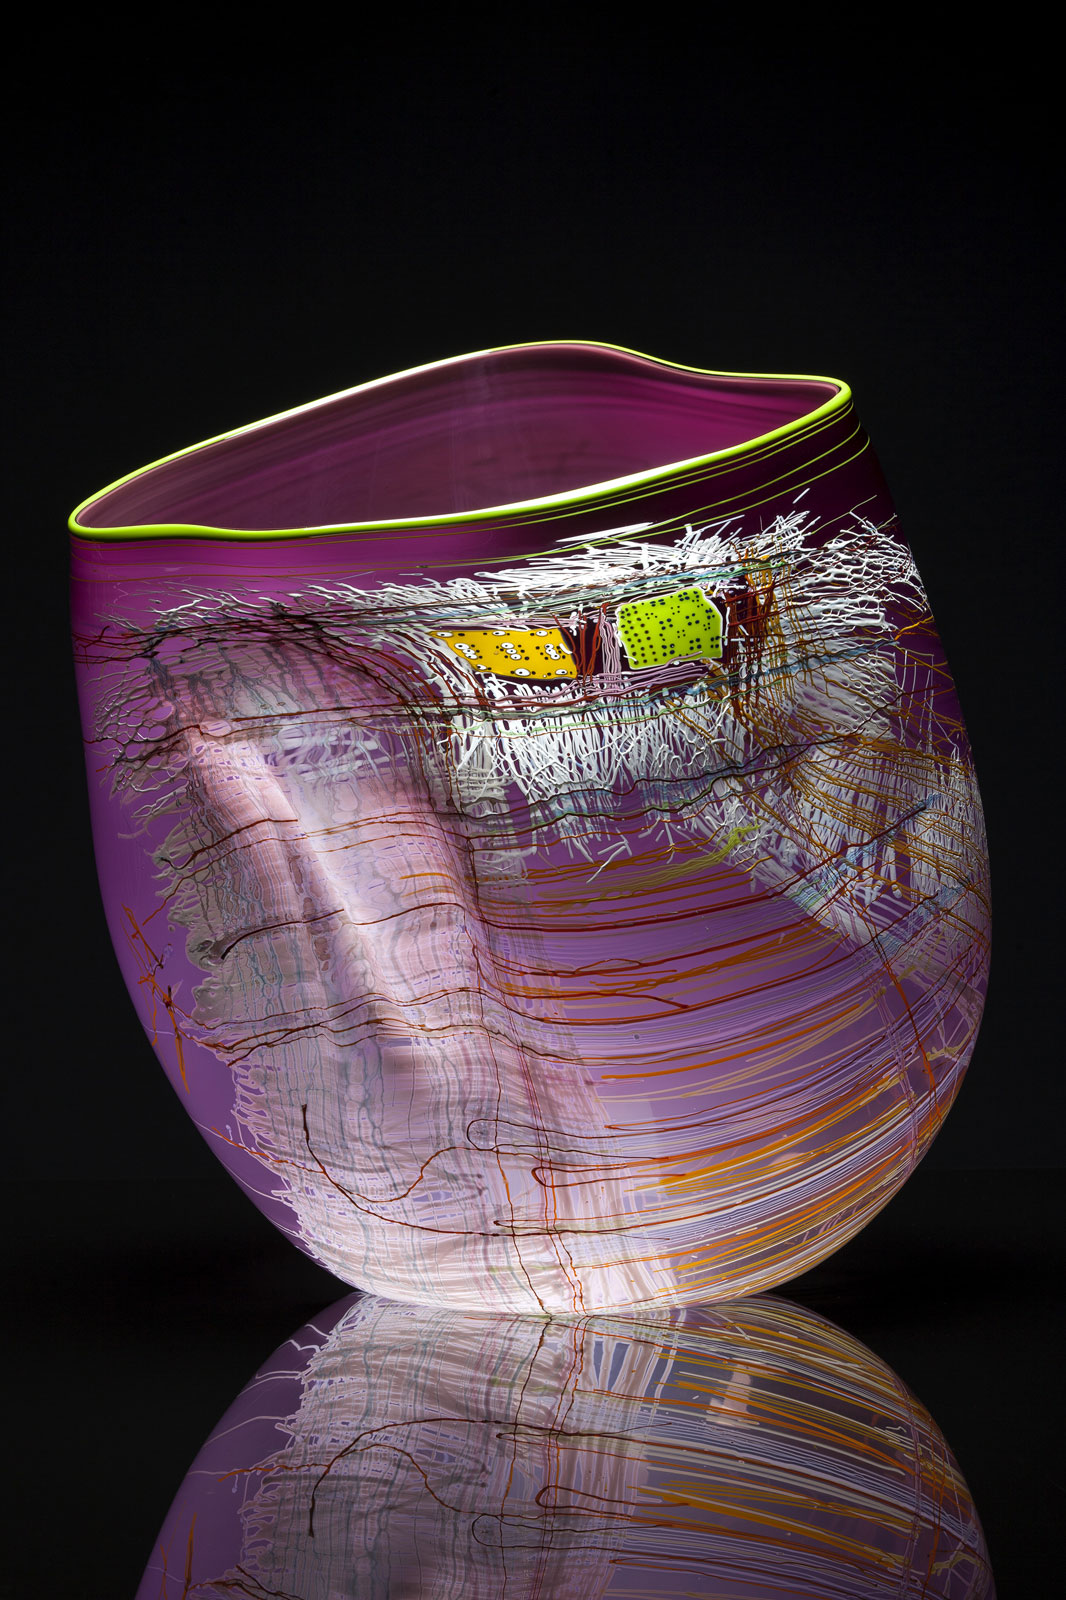 Plum Soft Cylinder with Chartreuse Lip Wrap, 2014 by Dale Chihuly